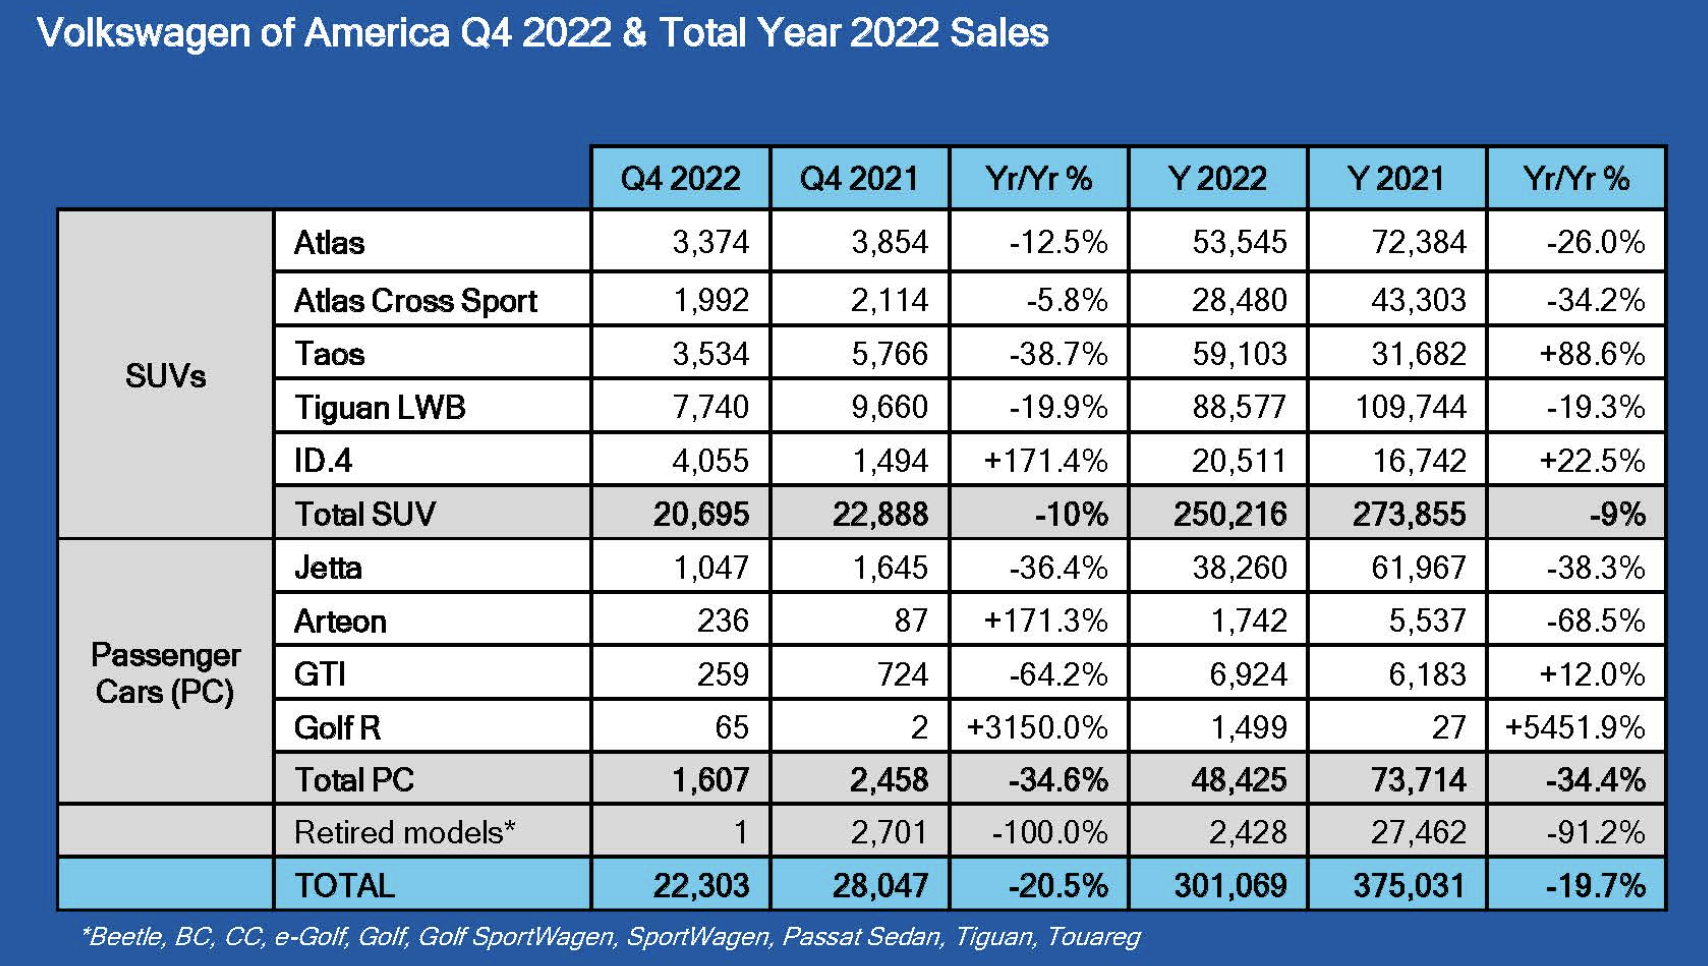 Volkswagen USA 2022 and 4th Quarter Sales - Volkswagen of America Reports 6.8% of US Sales Were Electric Vehicles in 2022